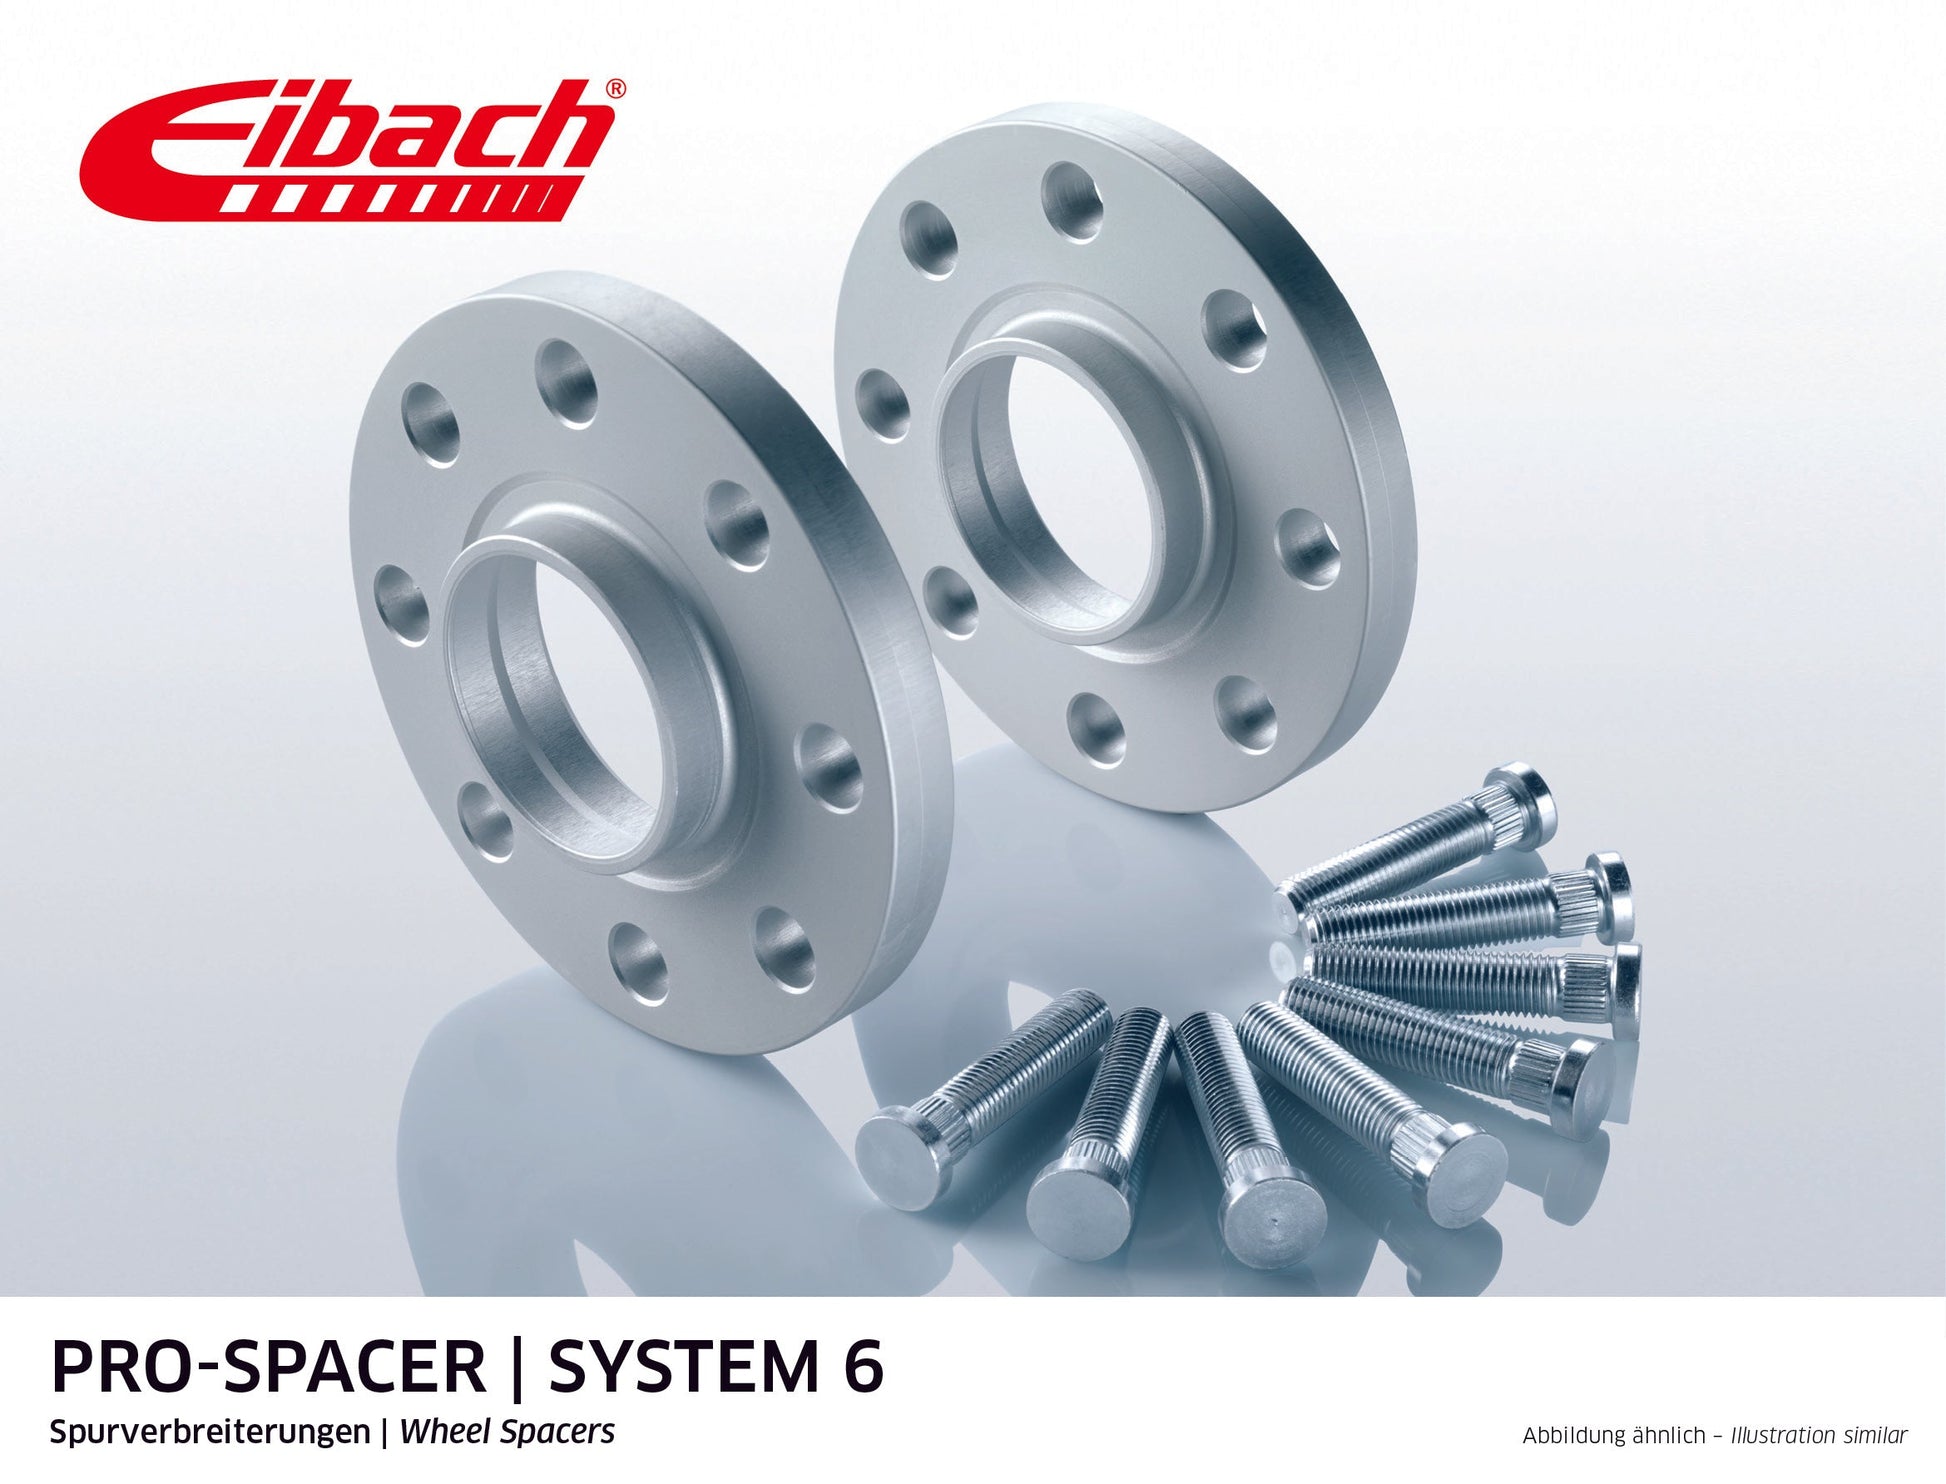 Eibach Pro-Spacer Kit (Pair Of Spacers) 15mm Per Spacer (System 6